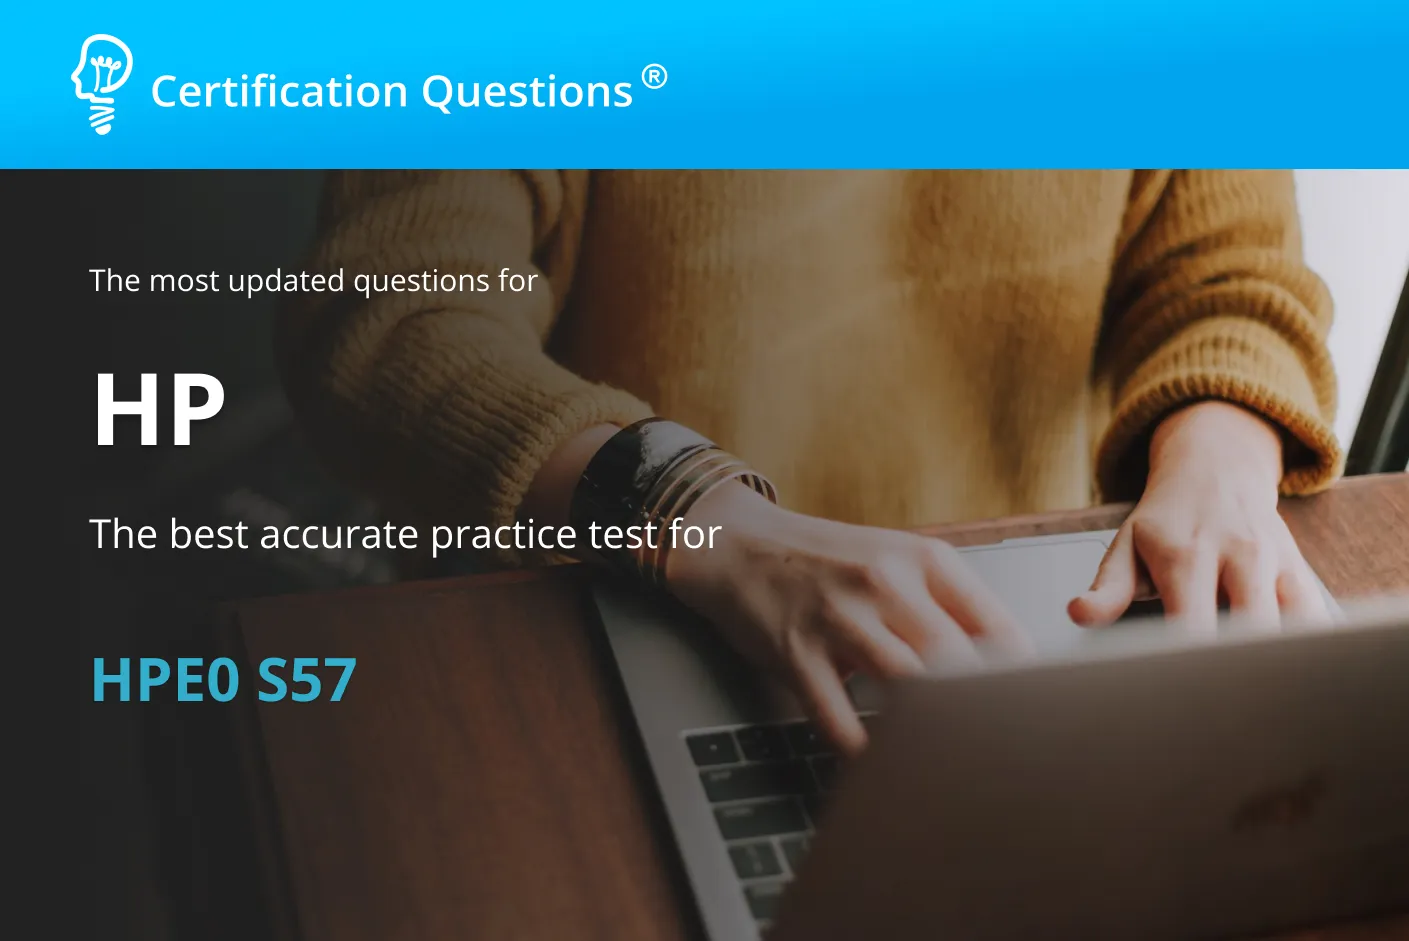 This image is related to HPE0-S57 Practice Test in the USA